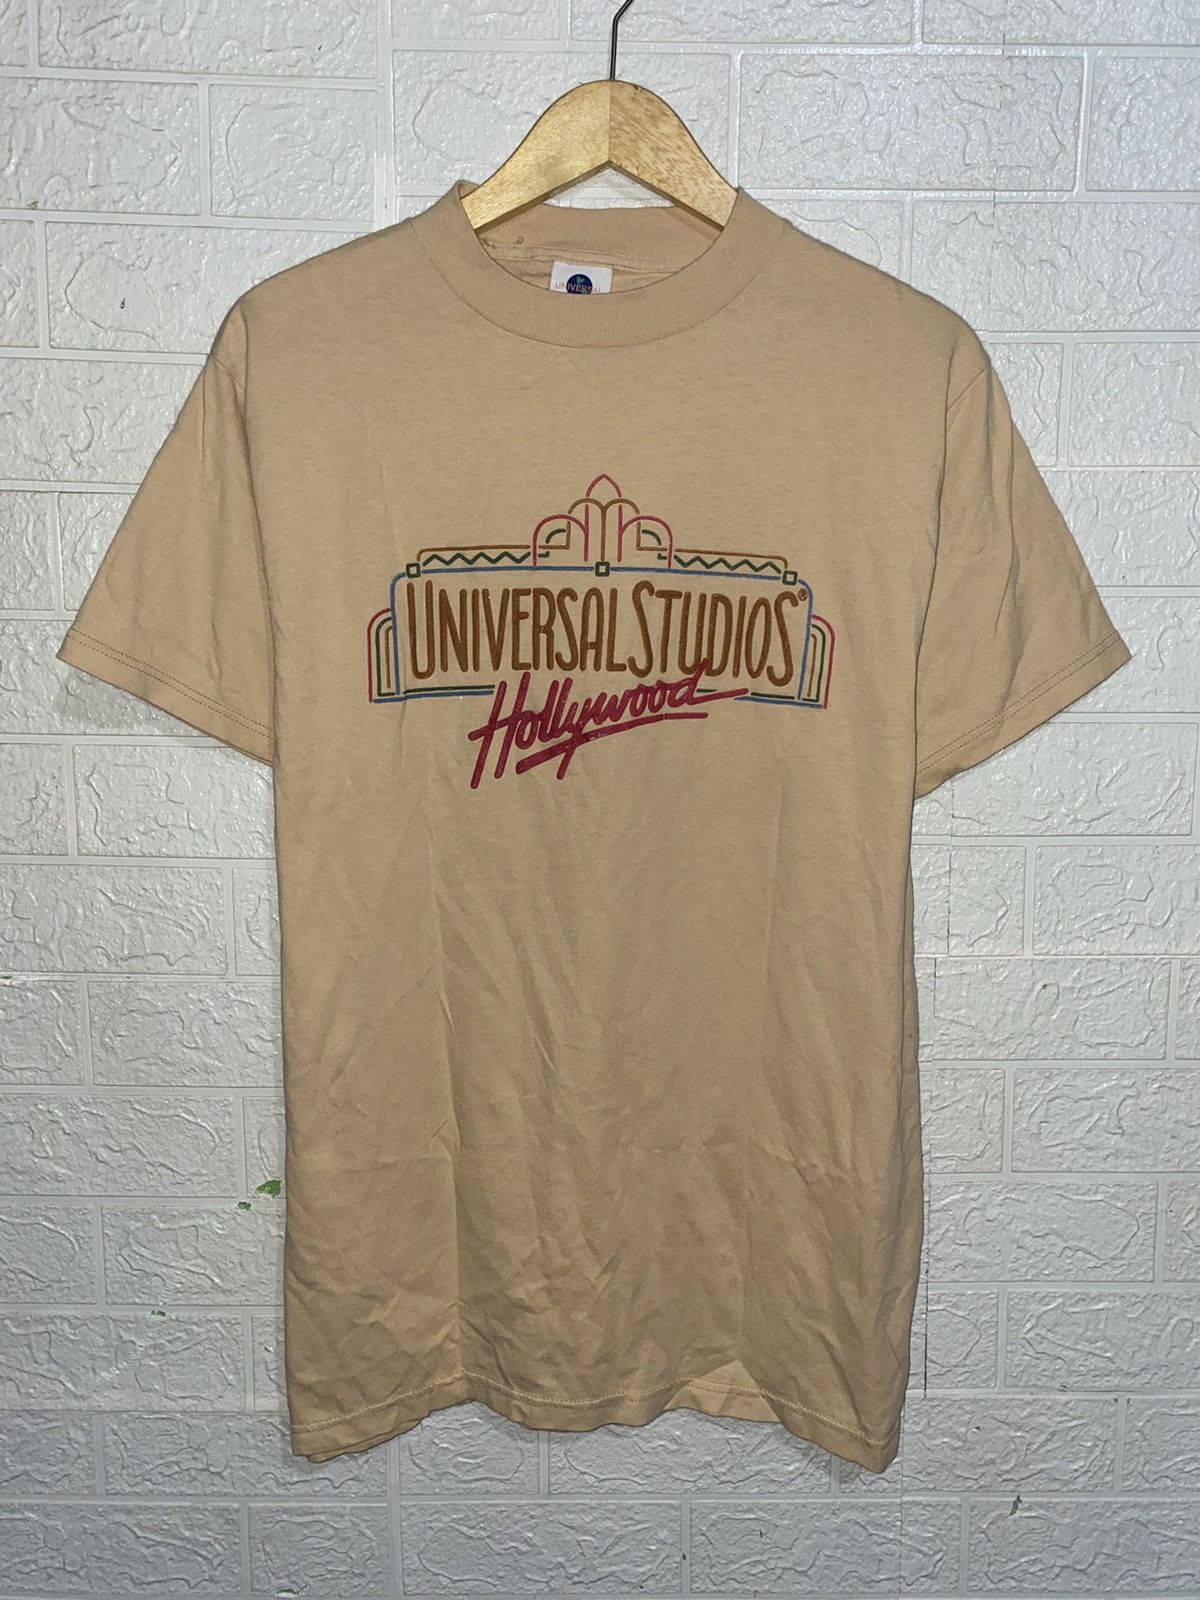 Vintage t shirt universal studios made in usa - 2